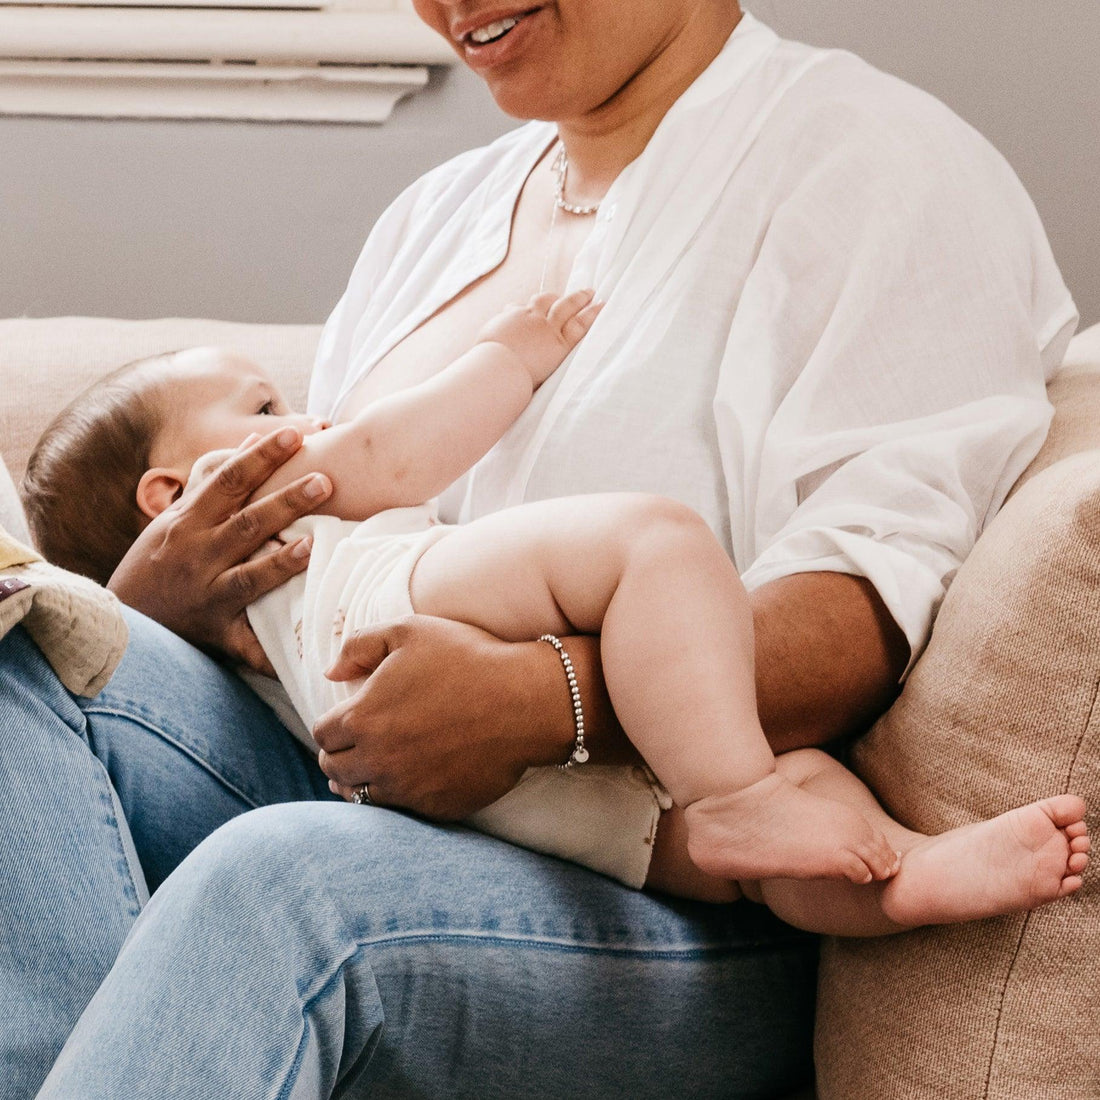 Weaning: The Forgotten Breastfeeding Stage